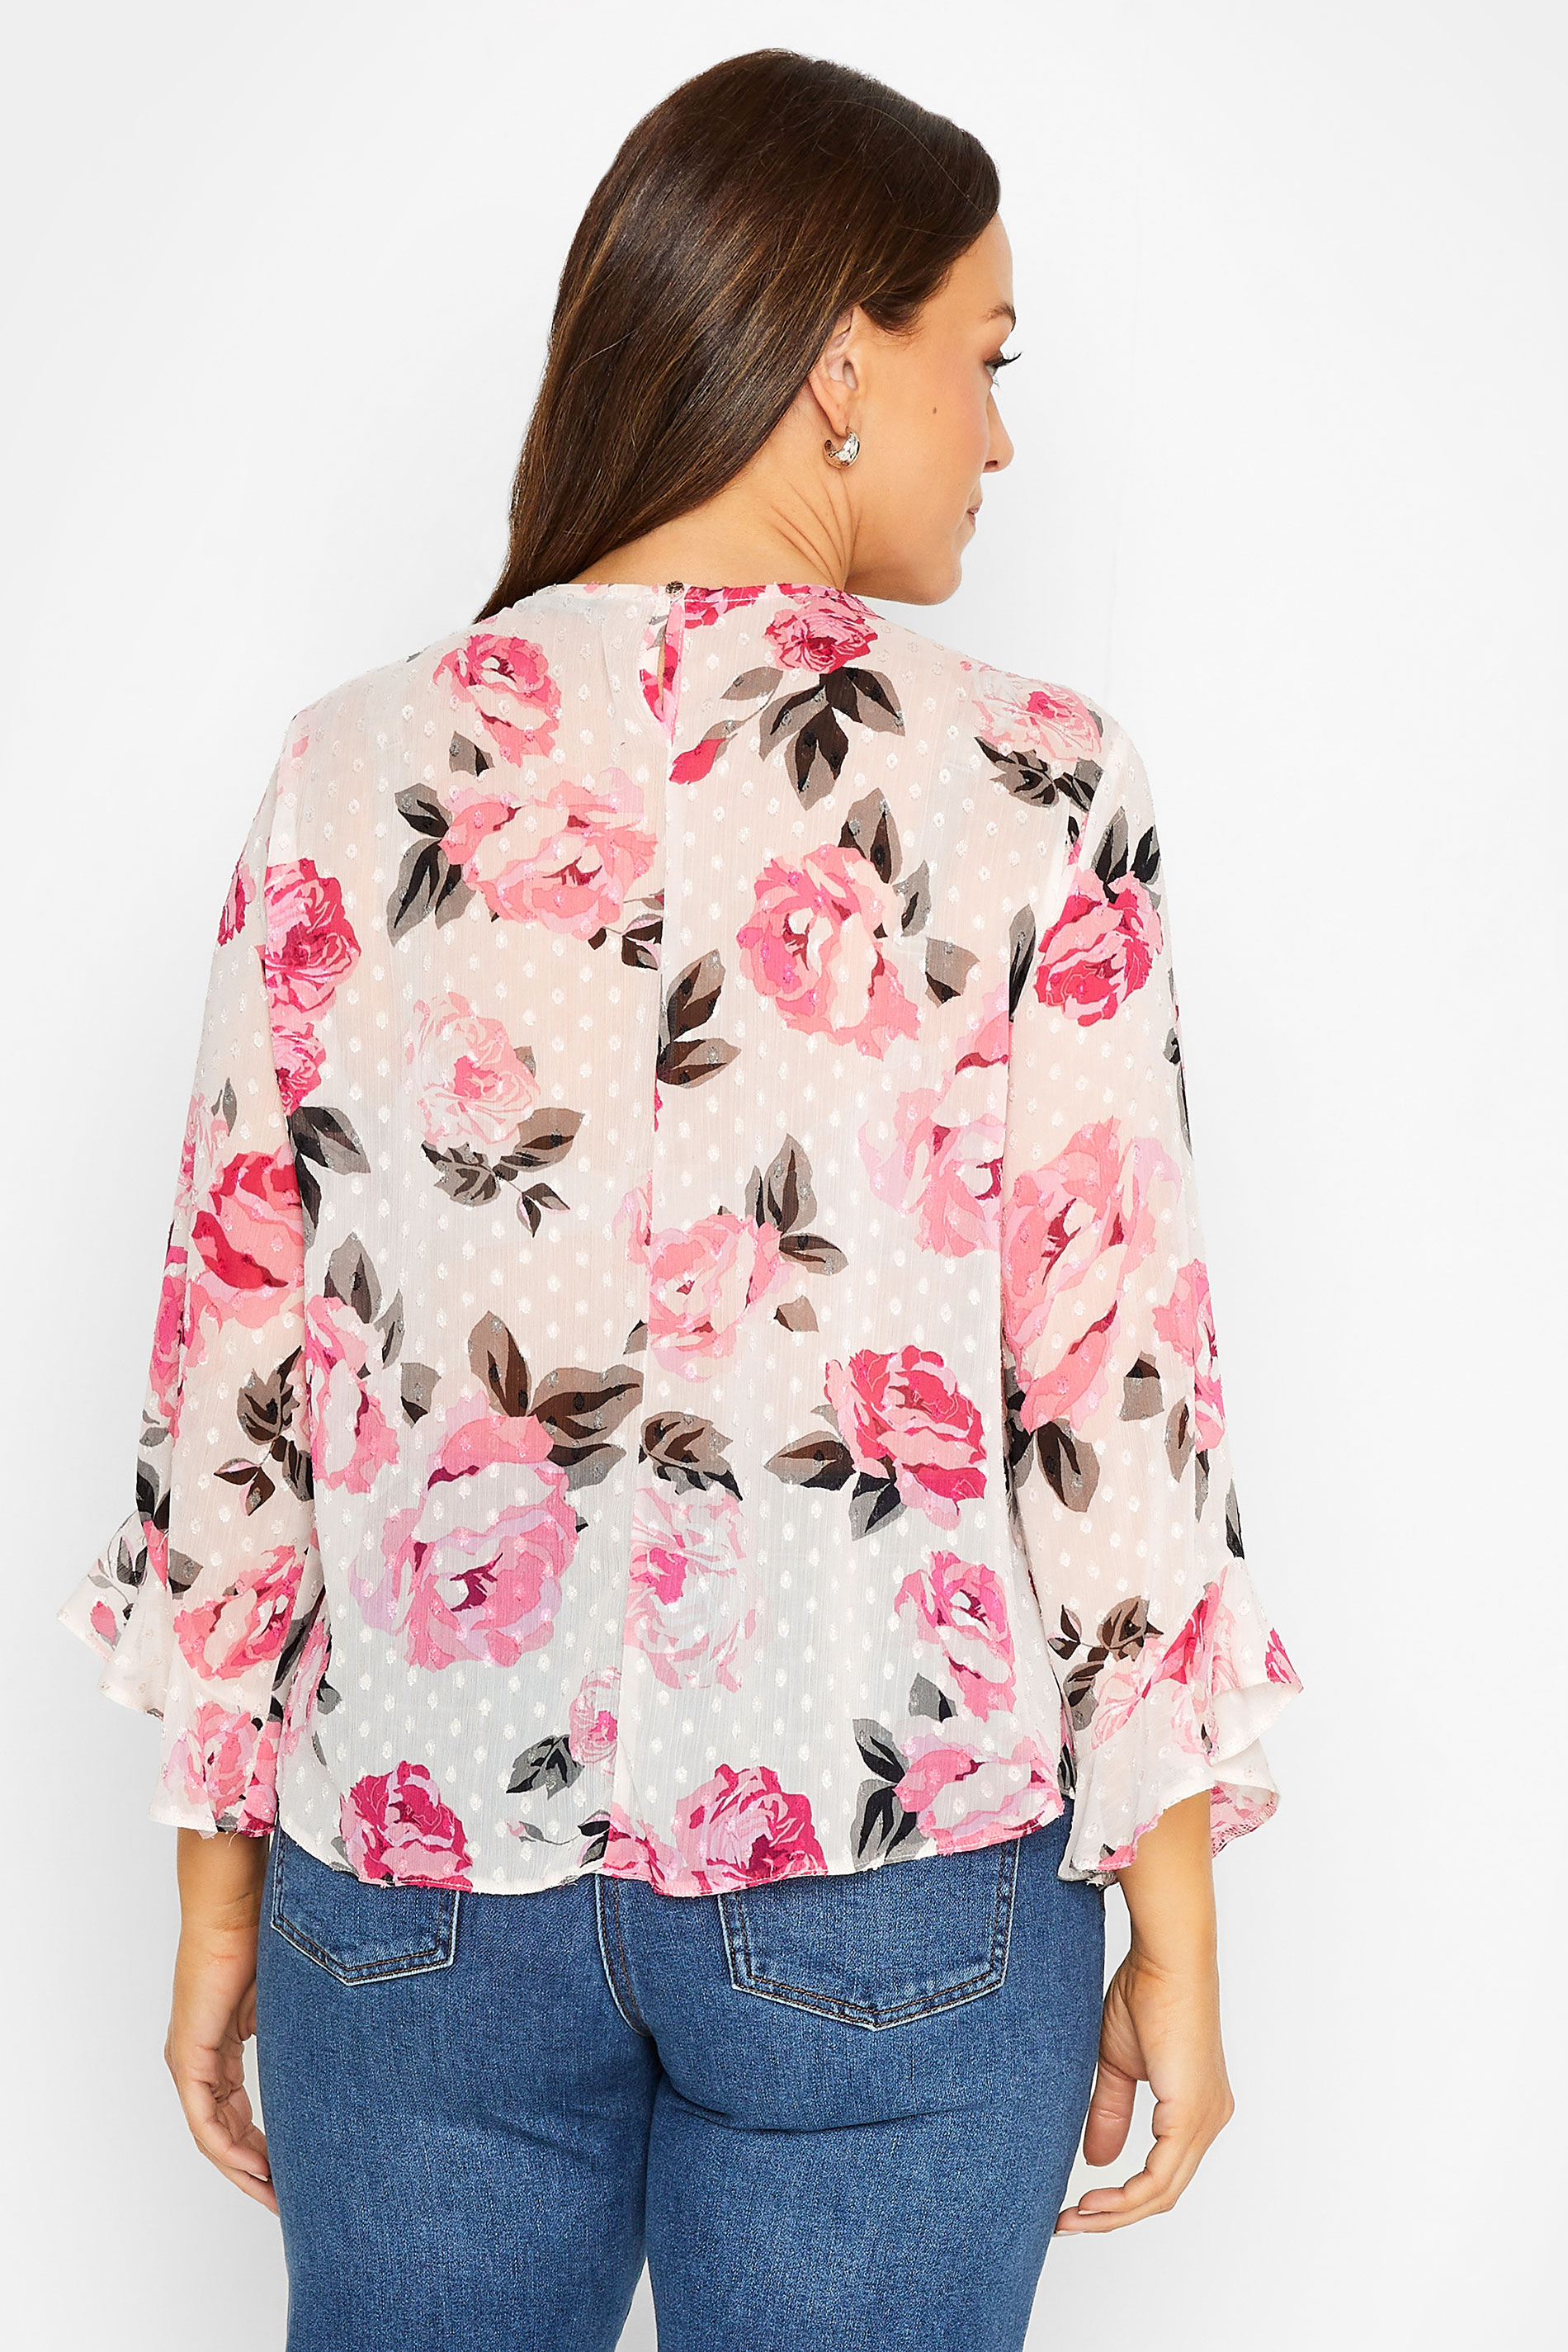 M&Co White Floral Print Dobby Frill Sleeve Blouse | M&Co 3